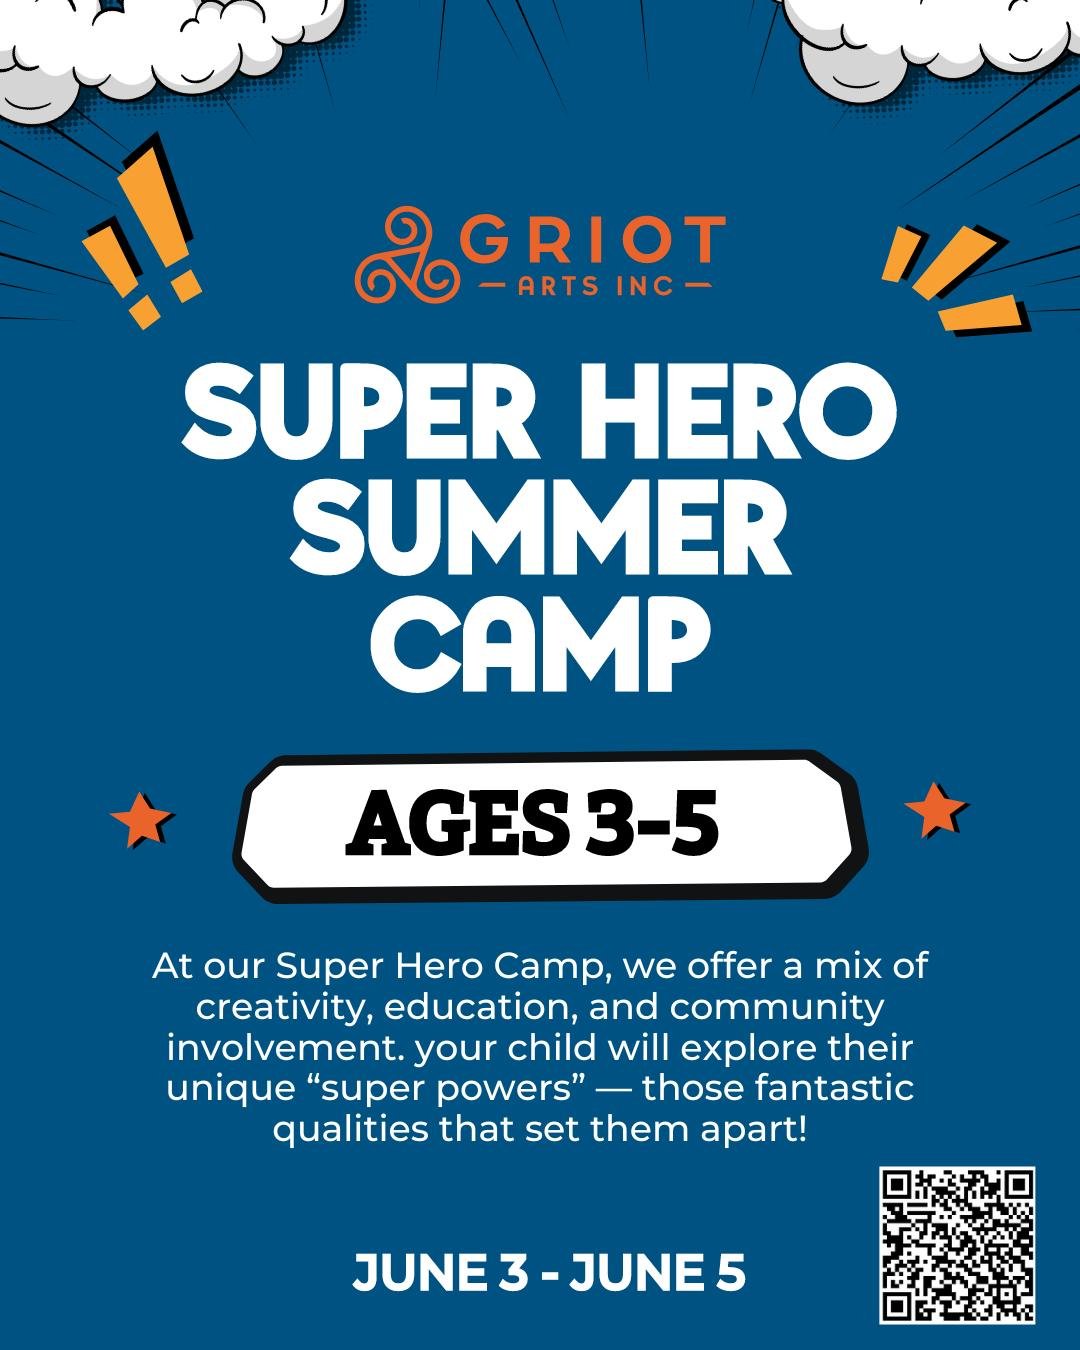 Introducing our 'Super Hero' Summer Camp tailored for 3-5 year olds! 🌟

Unleash your preschooler's inner hero this summer with Griot Arts! Our Super Hero Camp offers a specialized program packed with creativity, enjoyment, education, and community i